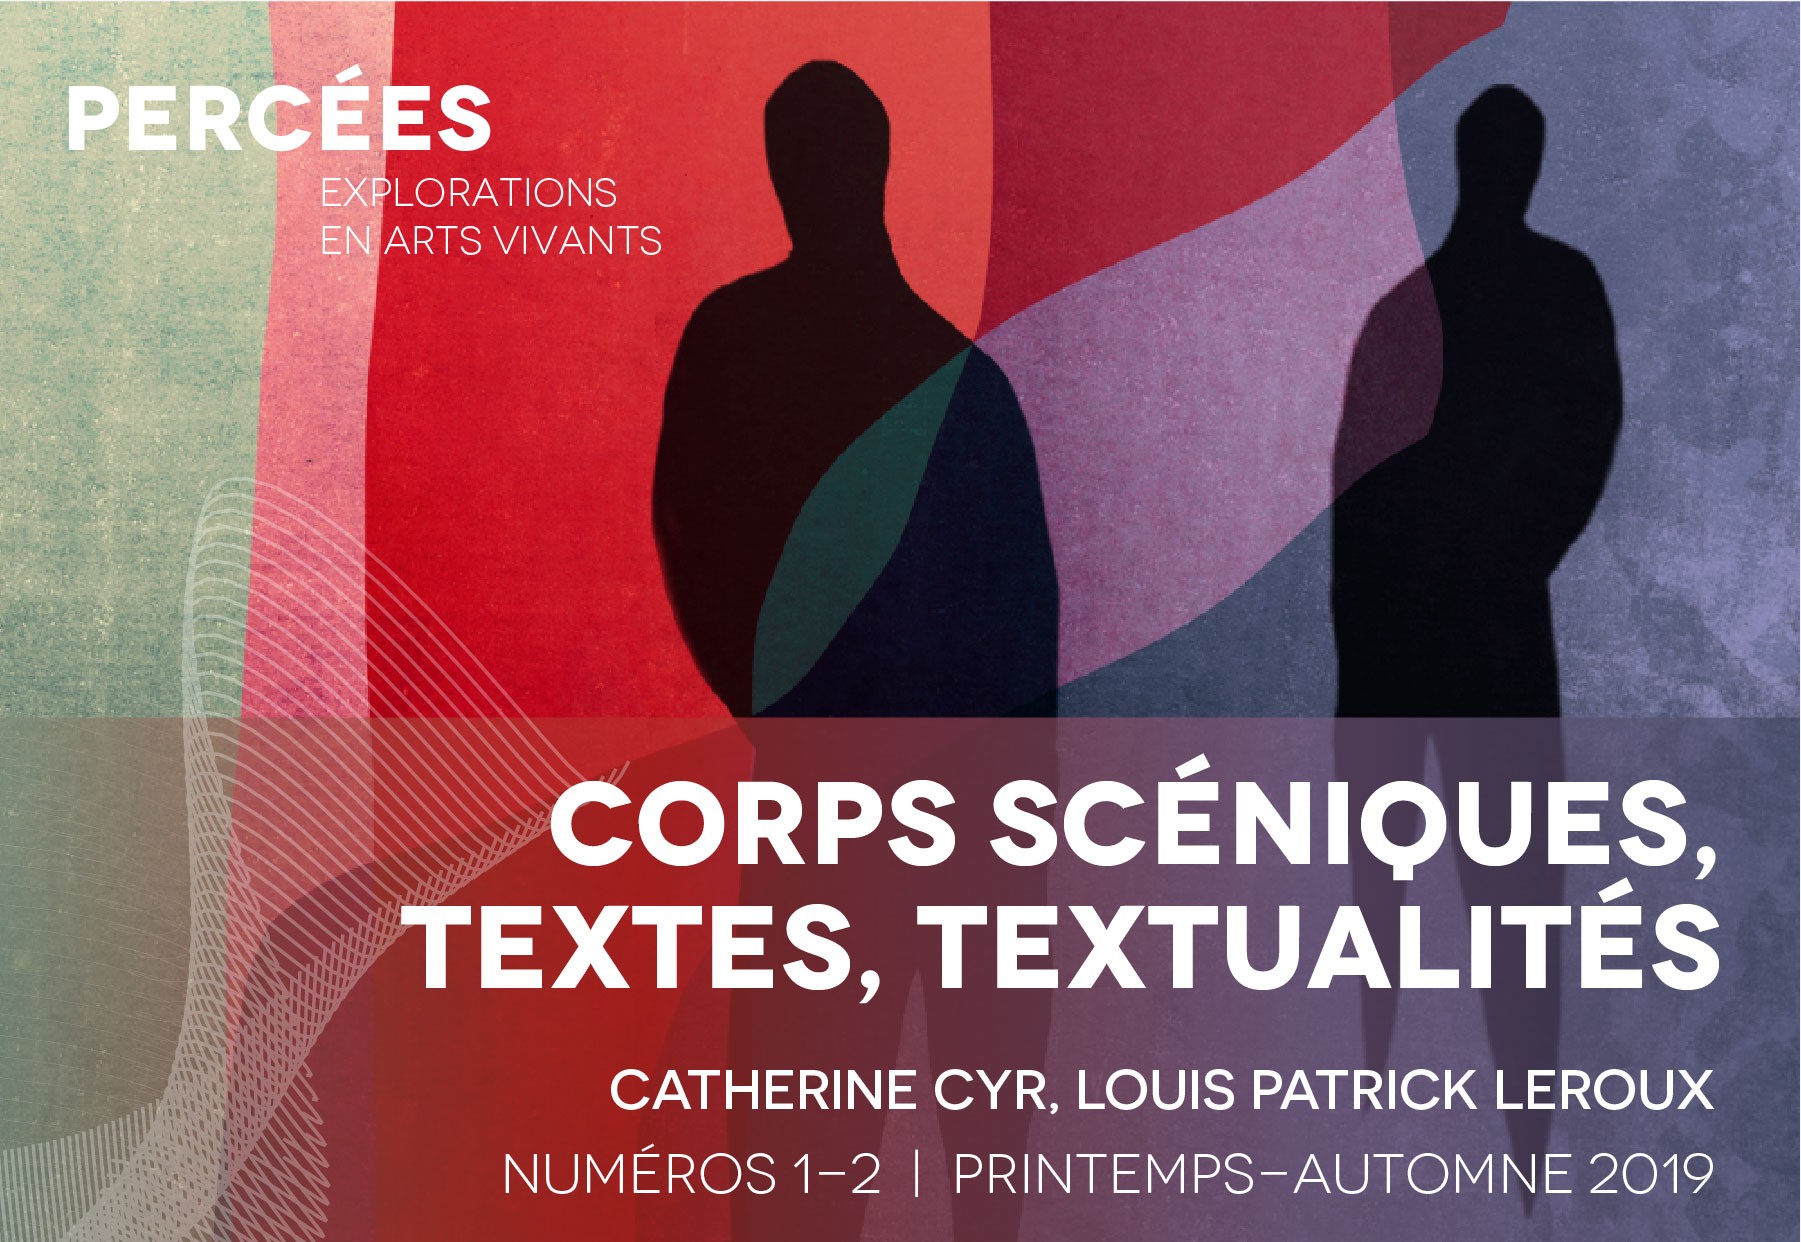 Book cover of Corps scéniques, textes, textualités Edited by Catherine Cyr and Louis Patrick Leroux